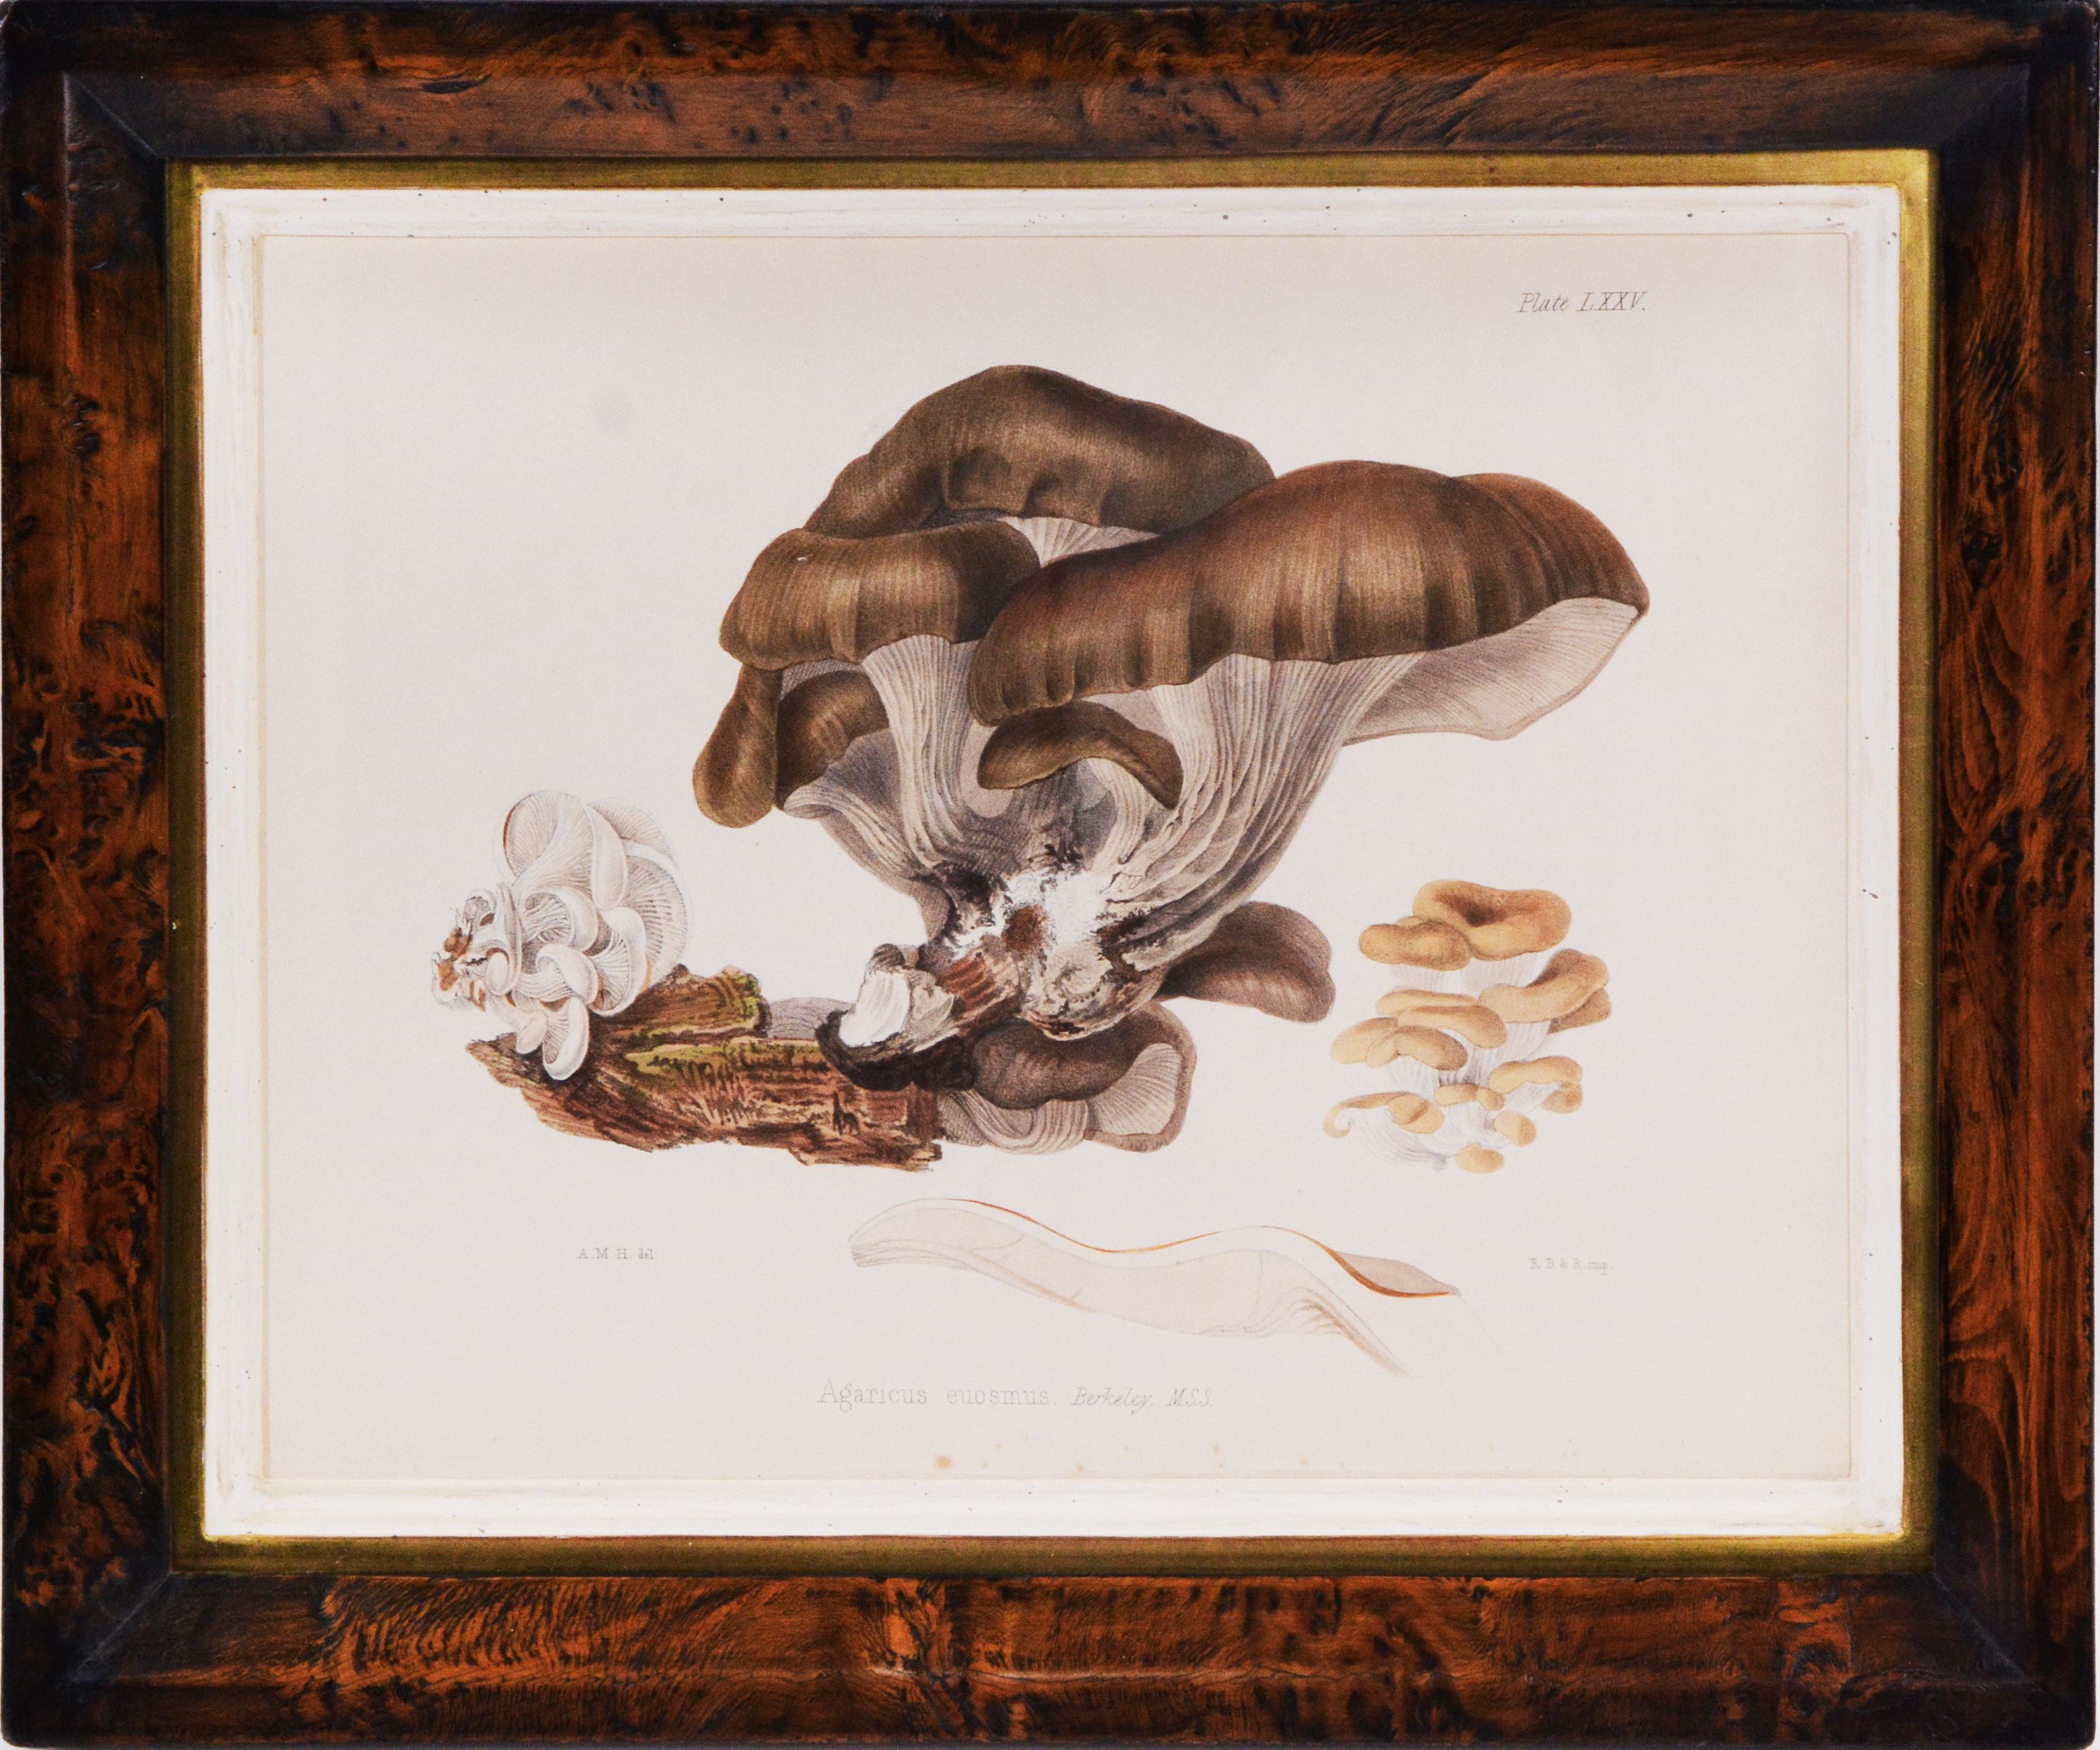 Group of Eight hand-coloured plates, heightened with gum arabic, of fungi, mushrooms and toadstools.   Framed and glazed:  31.7cm by 38.5cm  
This work is one of the most attractive British mycological publications. Mrs Hussey (1805 -1853) was a